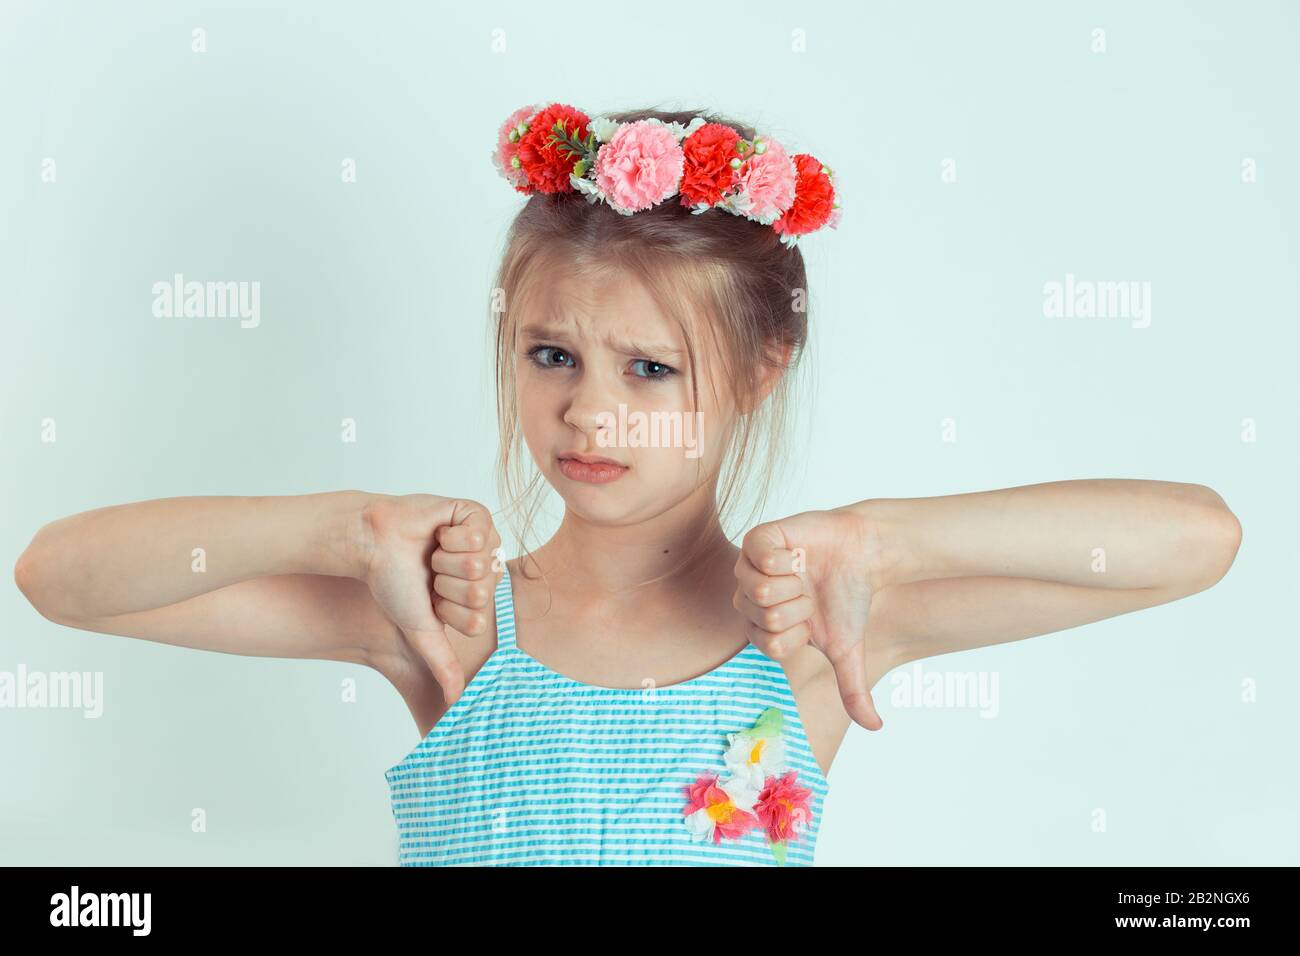 Girl kid showing thumbs down gesture. Body language, human emotion face expression. Closeup portrait of Caucasian kid model with floral headband isola Stock Photo